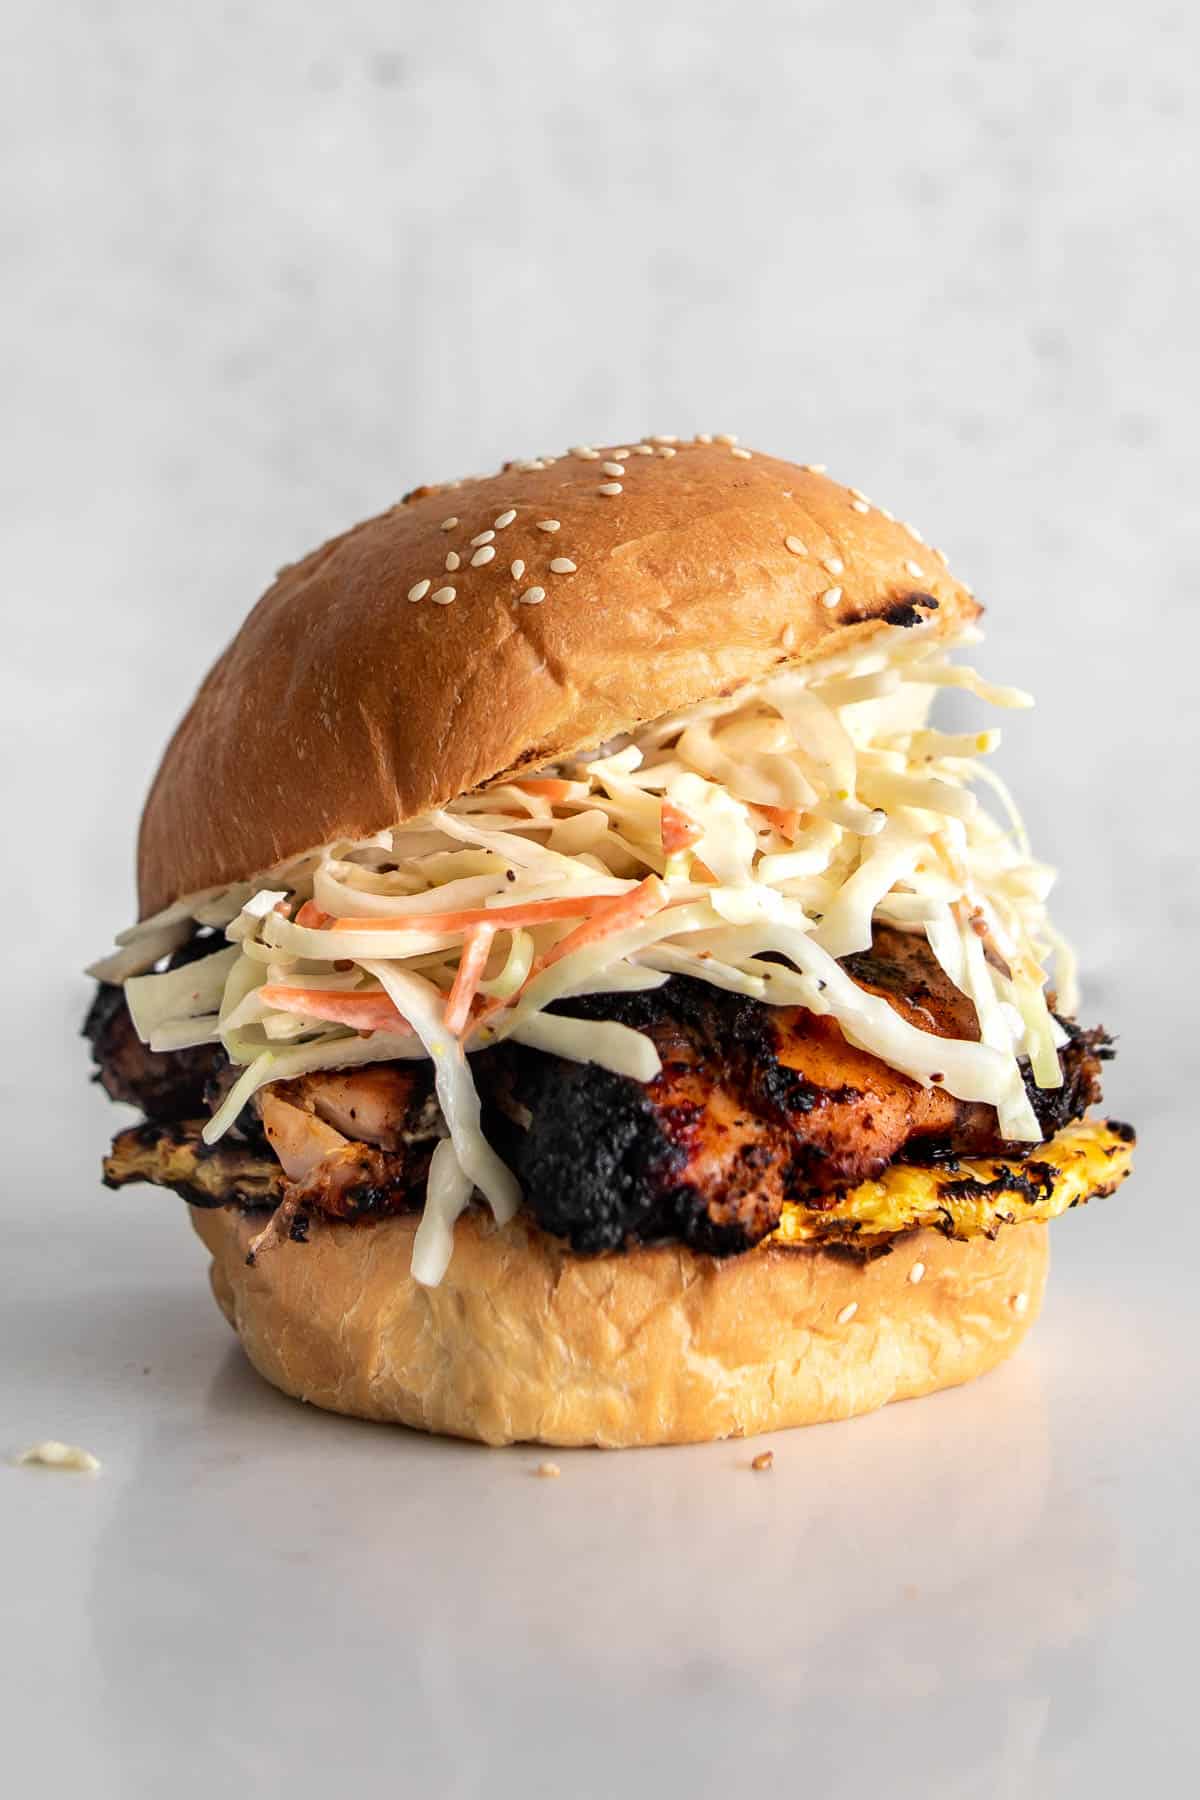 Grilled Jerk Chicken Sandwich with coleslaw and grilled pineapple on a sesame seed bun.